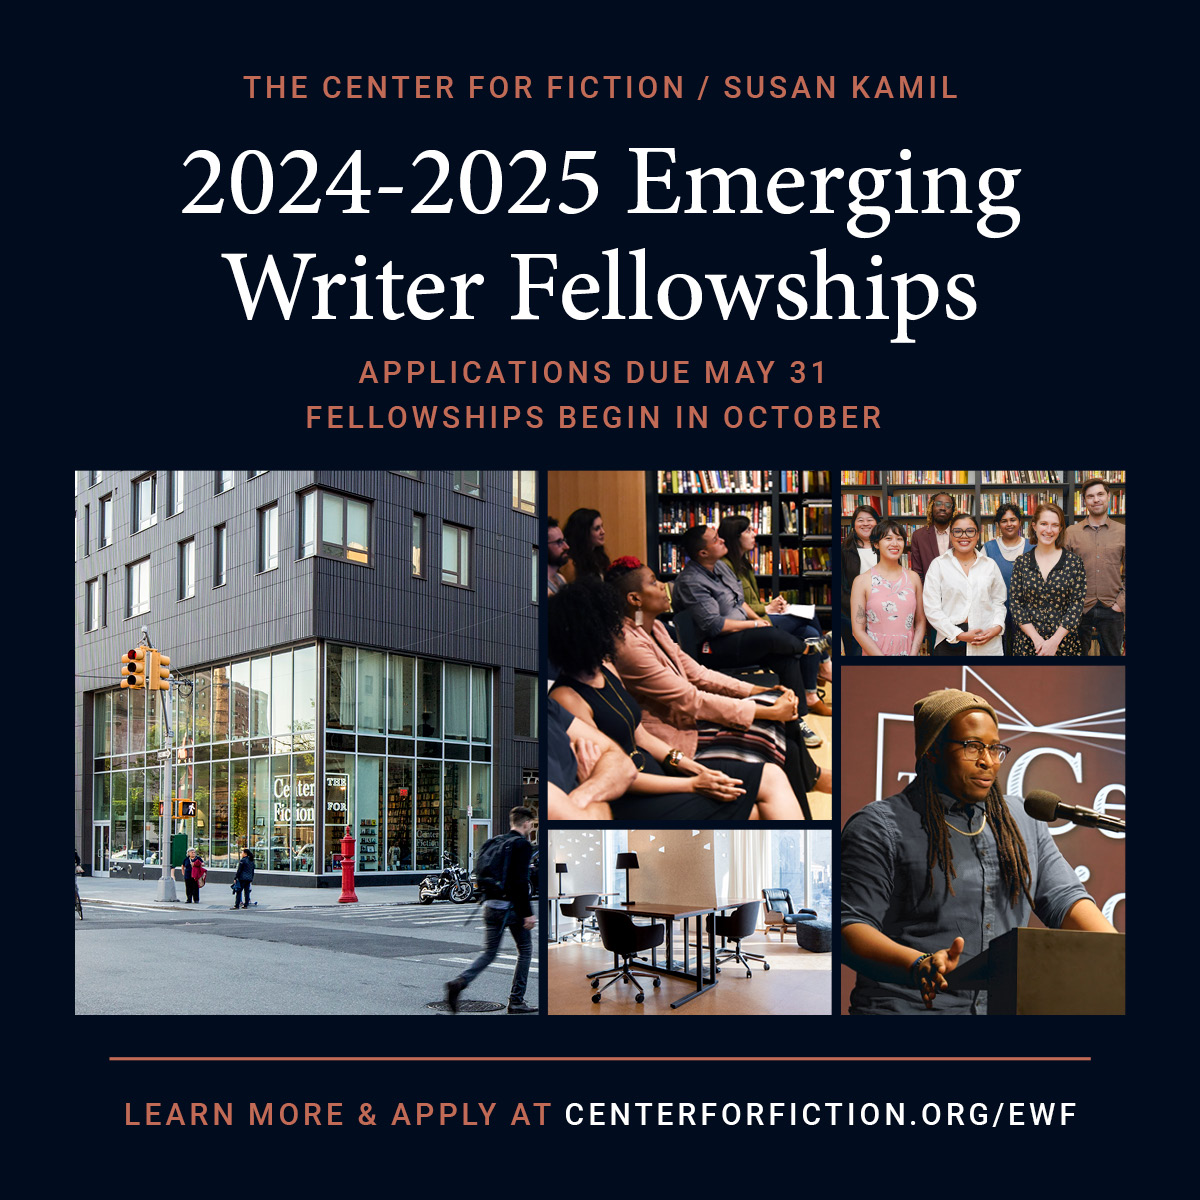 The application period for the 2024-2025 Emerging Writer Fellowships is now officially open! Are you a New York City-based fiction writer who hasn't published a book? Submit a writing sample by May 31st to apply. (It's free!) Learn more here: tinyurl.com/5n9bawf7